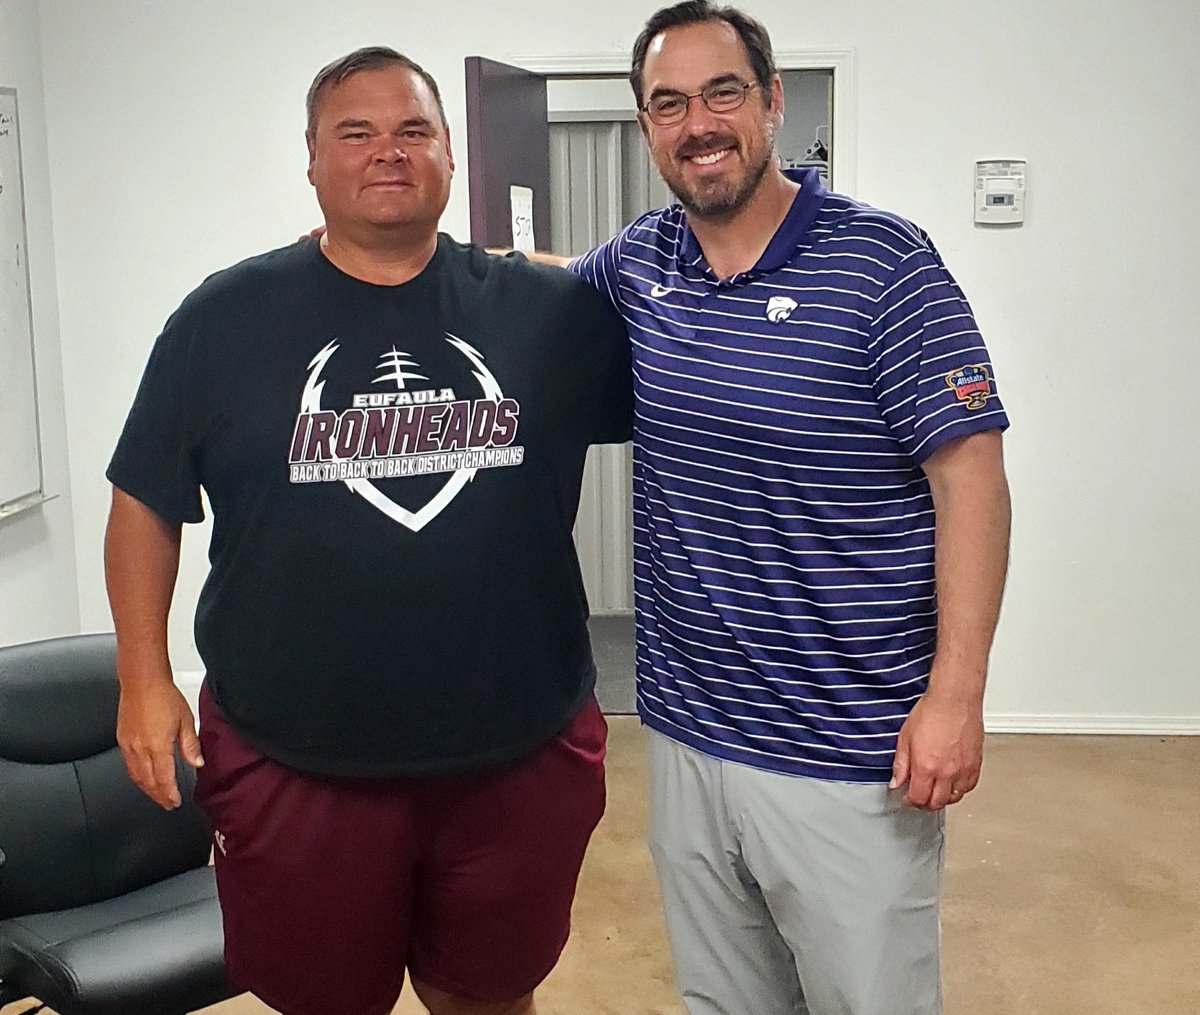 Big shout out and thank you for Coach Lepak with Kansas State stopping by and checking on potential players. Also a big thanks for recruiting Oklahoma kids! @CoachBrianLepak